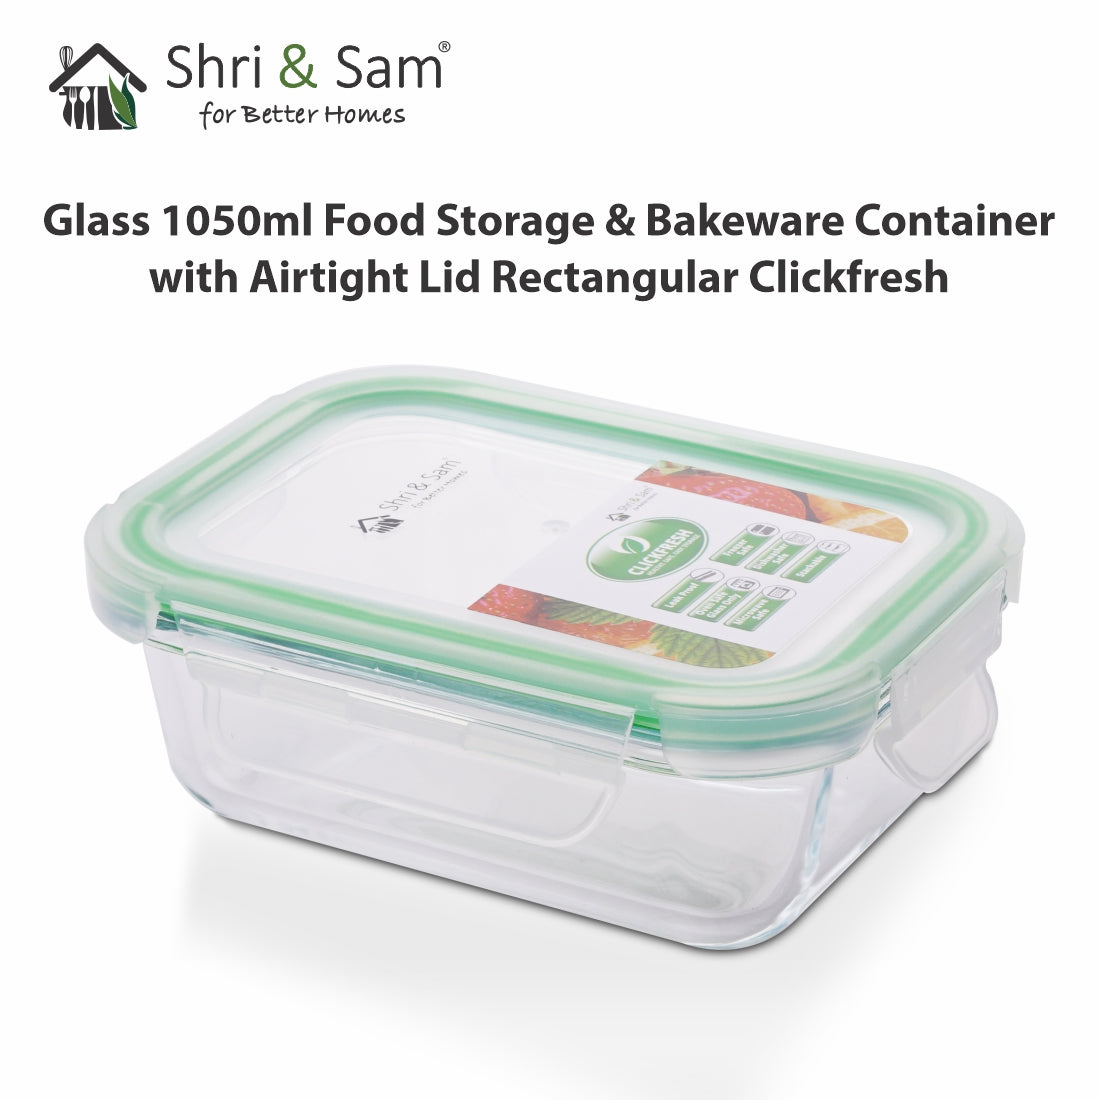 Glass 1050ml Food Storage & Bakeware Container with Airtight Lid Rectangular Clickfresh